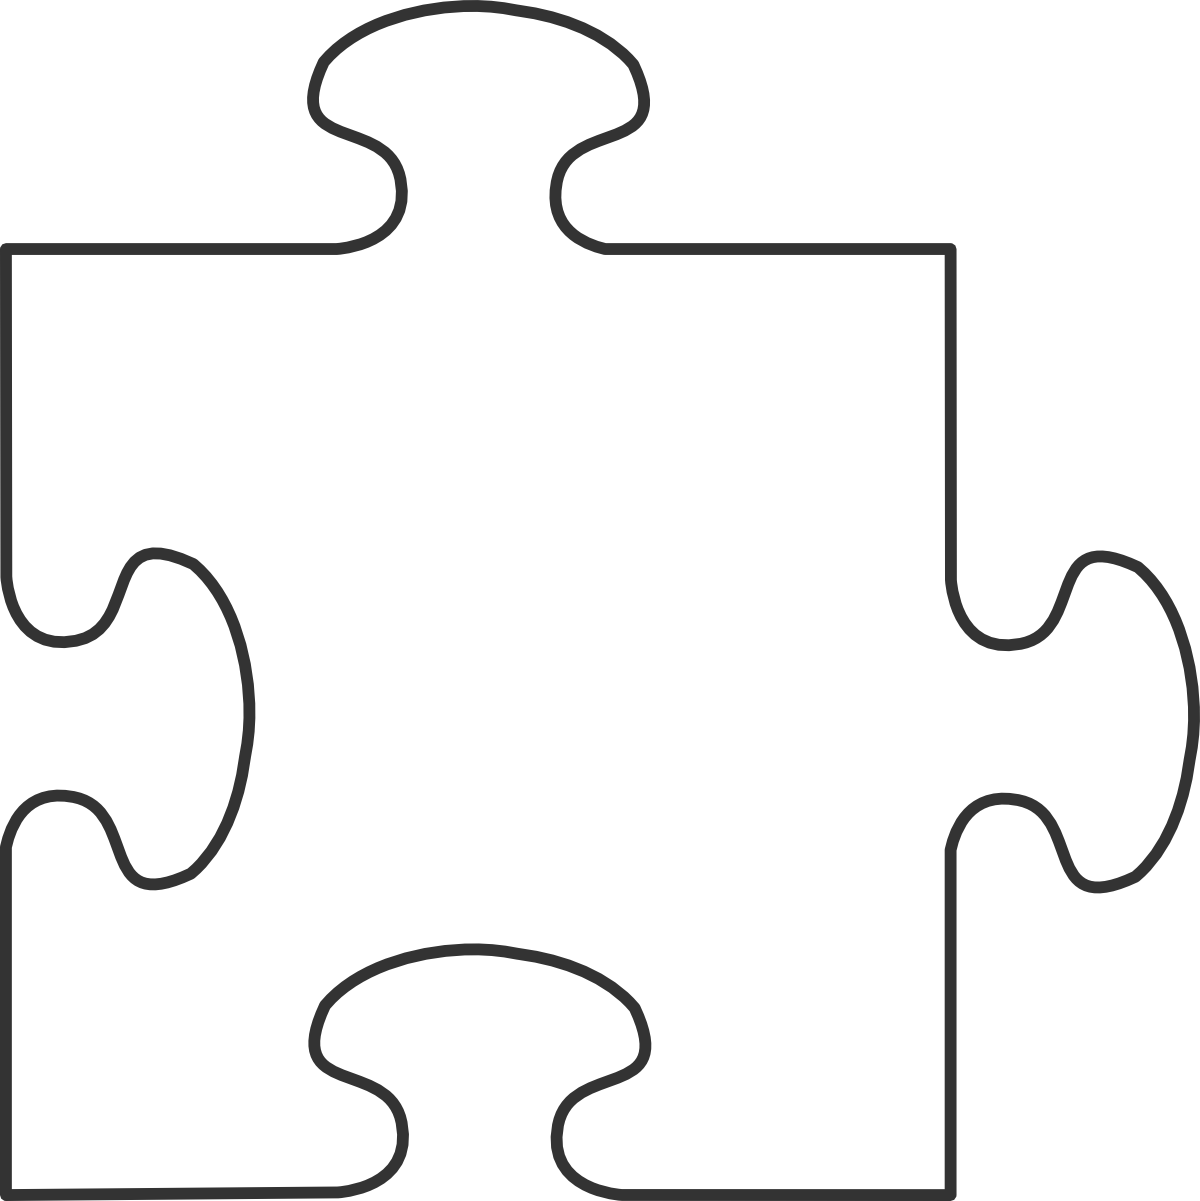 Puzzle Piece Border Vector: AI and EPS Downloads